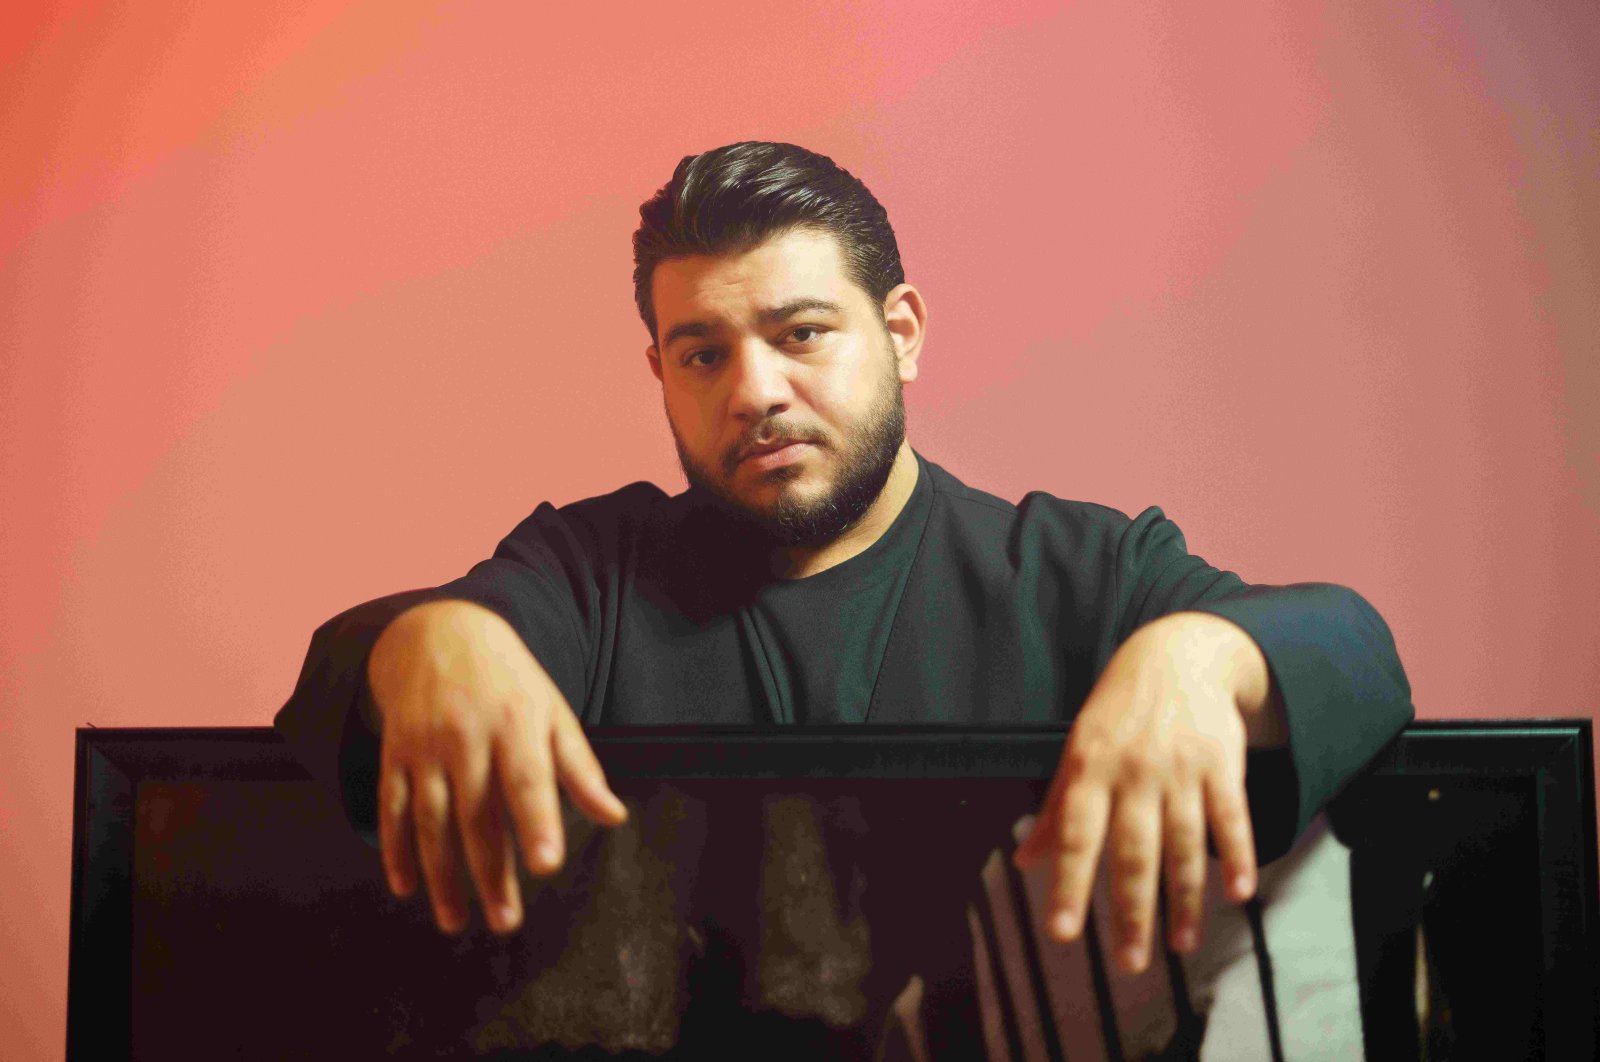 Ahiyan, credited with writing all the lyrics on the album, collaborated with accomplished producers and sound engineers such as Osmancello, Furkan Gülfidan, Tawana and Jagerstereo. (Photo courtesy of Ahiyan)